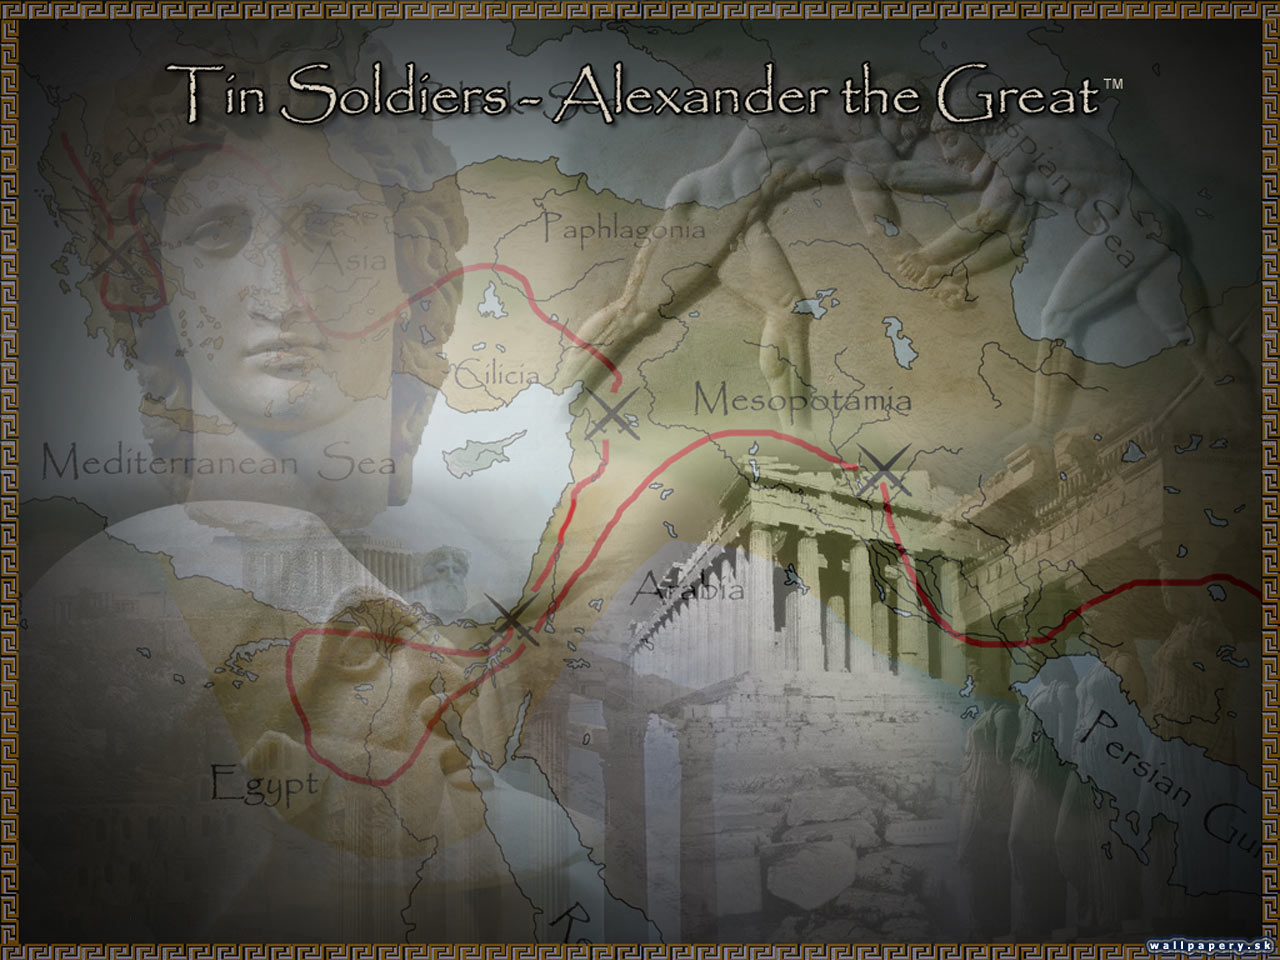 Tin Soldiers: Alexander the Great - wallpaper 1